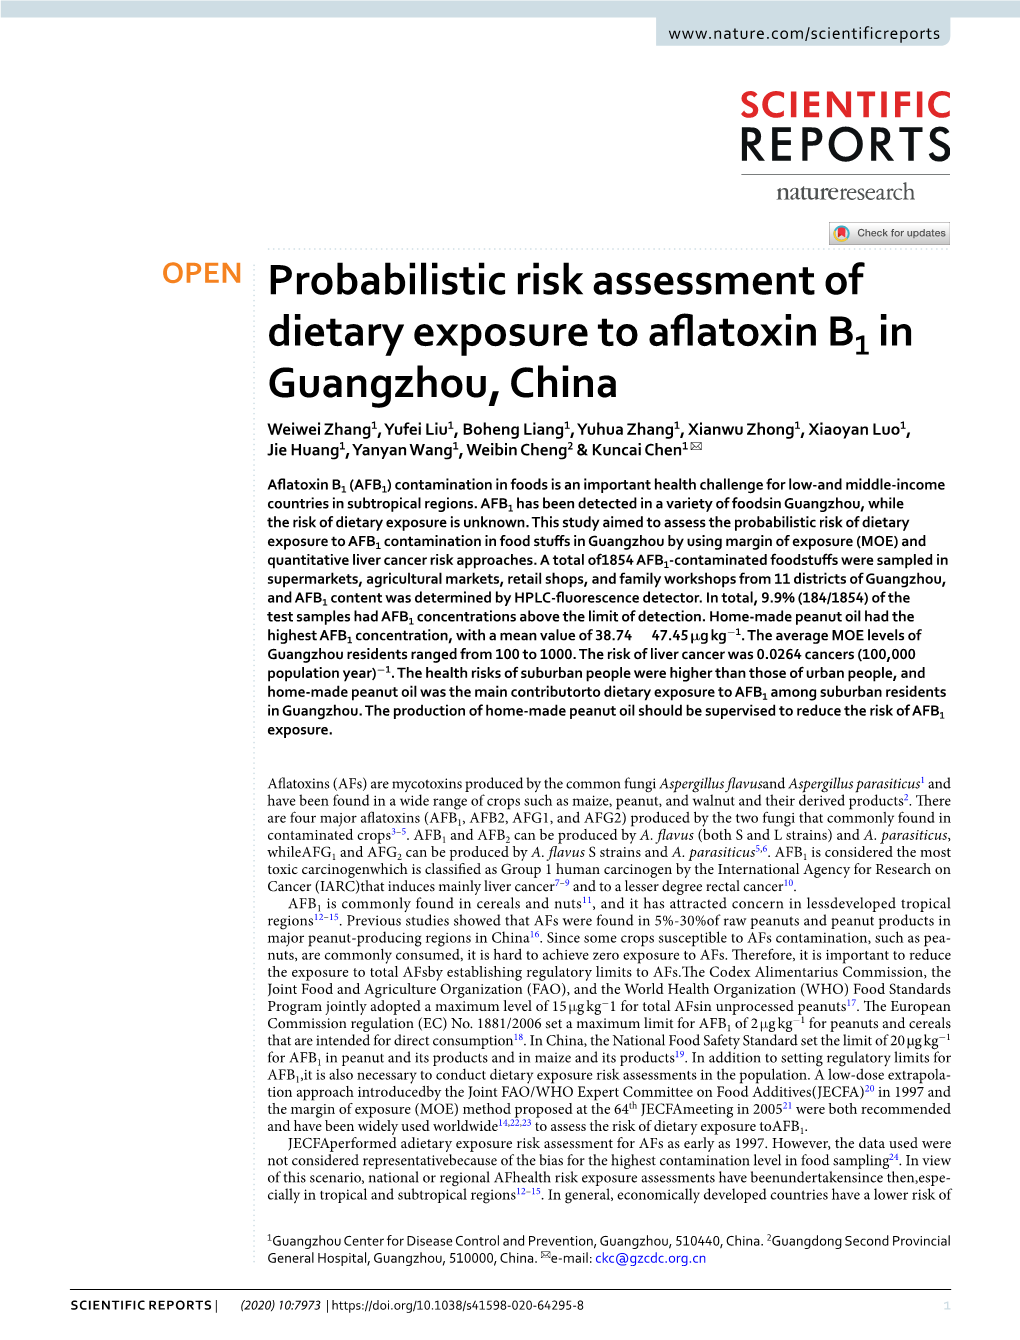 Probabilistic Risk Assessment of Dietary Exposure to Aflatoxin B1 In